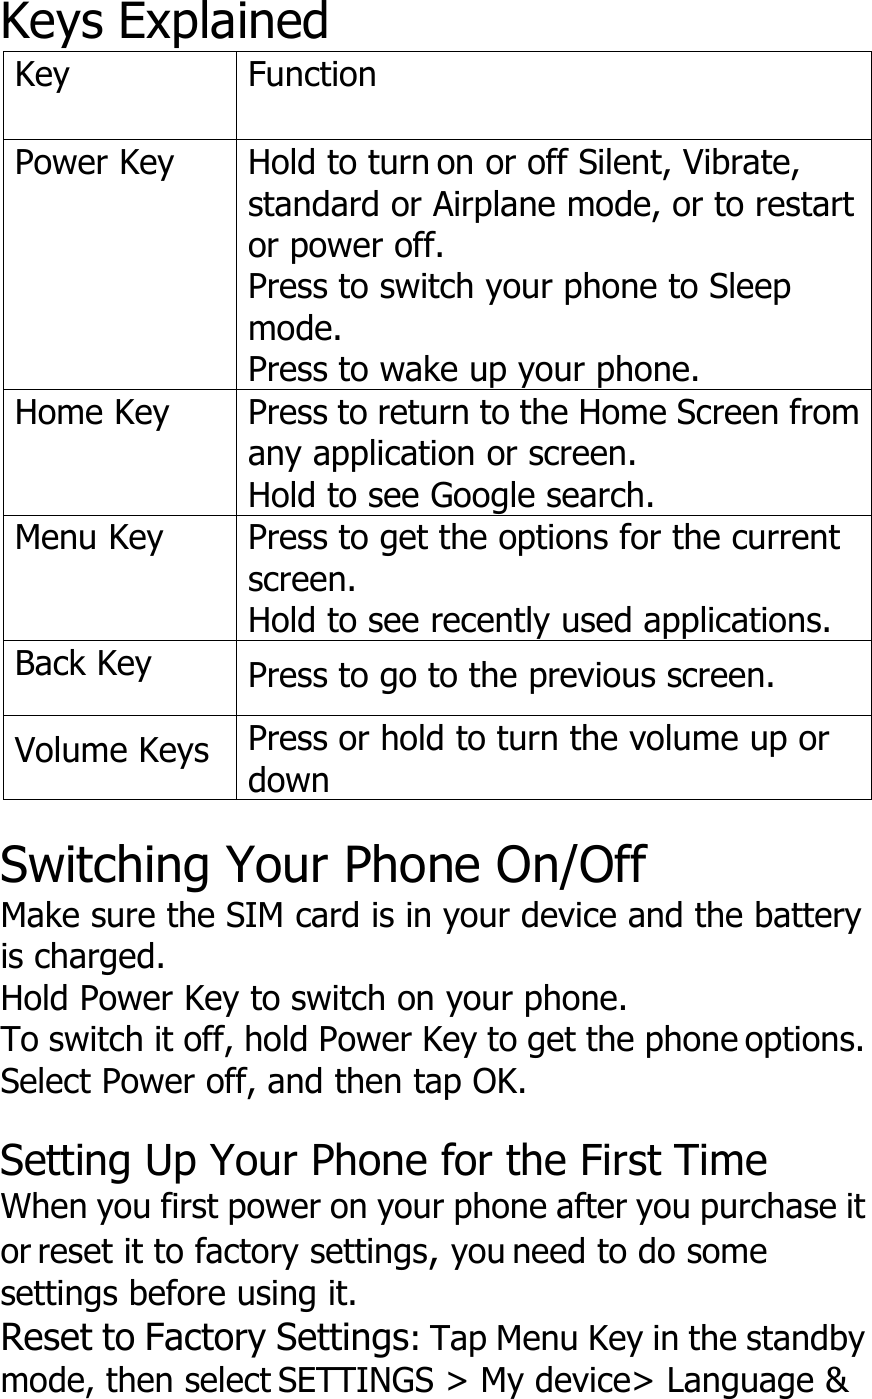 Keys ExplainedKeyFunctionPower KeyHold to turn on or off Silent, Vibrate,standard or Airplane mode, or to restartor power off.Press to switch your phone to Sleepmode.Press to wake up your phone.Home KeyPress to return to the Home Screen fromany application or screen.Hold to see Google search.Menu KeyPress to get the options for the currentscreen.Hold to see recently used applications.Back KeyPress to go to the previous screen.Volume KeysPress or hold to turn the volume up ordownSwitching Your Phone On/OffMake sure the SIM card is in your device and the batteryis charged.Hold Power Key to switch on your phone.To switch it off, hold Power Key to get the phone options.Select Power off, and then tap OK.Setting Up Your Phone for the First TimeWhen you first power on your phone after you purchase itor reset it to factory settings,you need to do somesettings before using it.Reset to Factory Settings: Tap Menu Key in the standbymode, then select SETTINGS &gt; My device&gt; Language &amp;